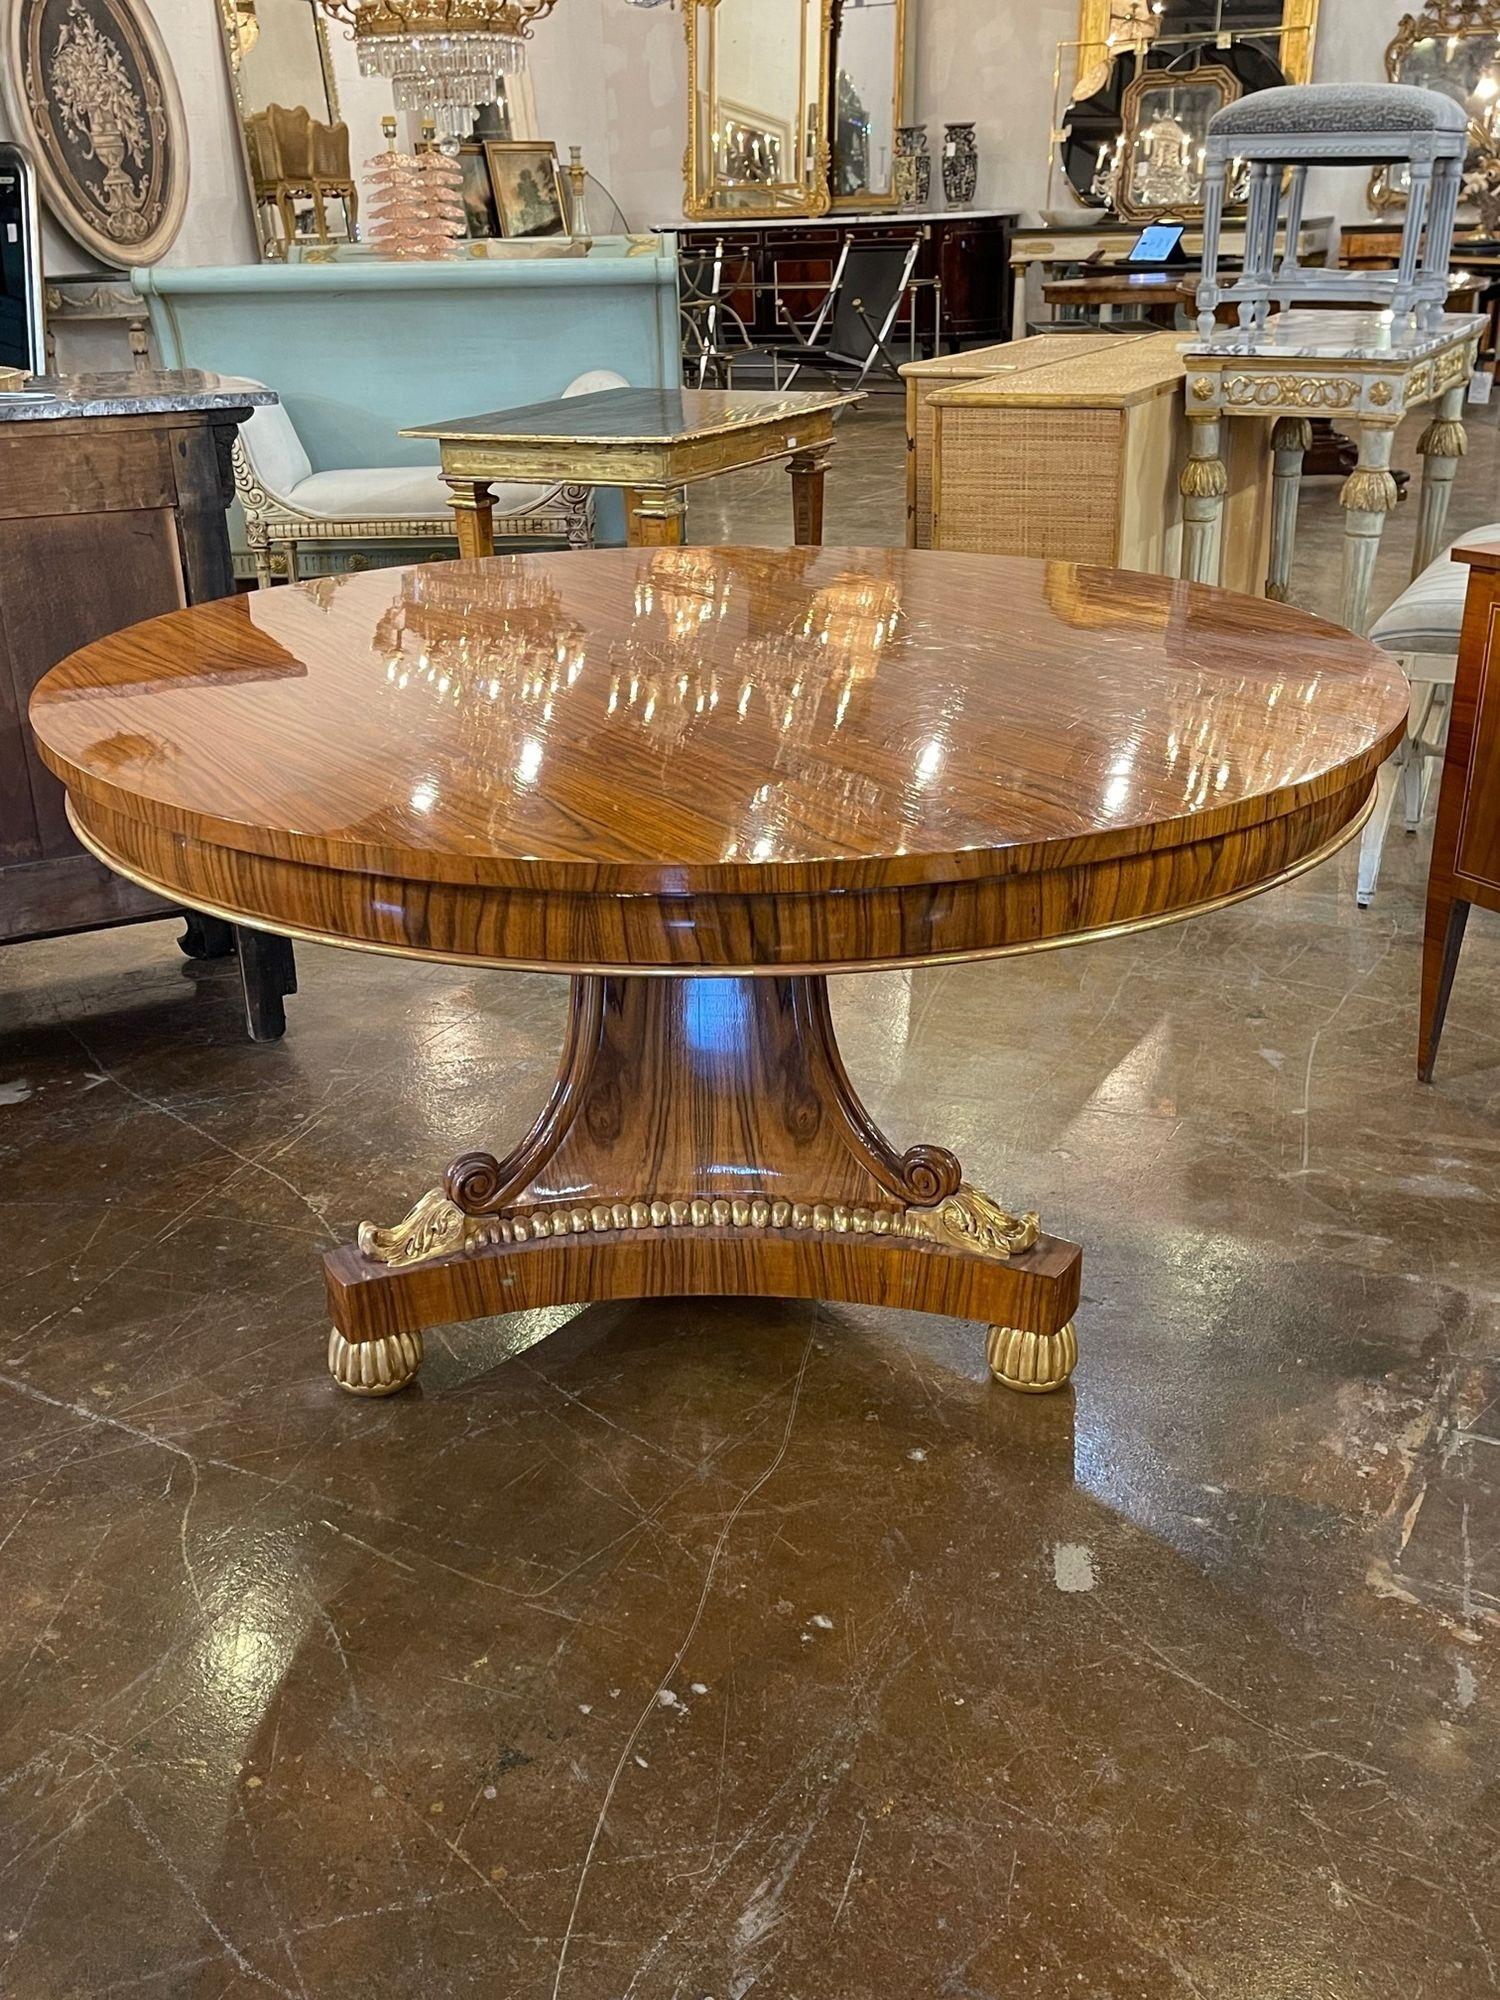 Elegant vintage English Regency style Rosewood and gilt center table. Featuring beautiful wood grain and an extremely polished finish along with the gilt details. Creates a very sophisticated look! Fabulous!